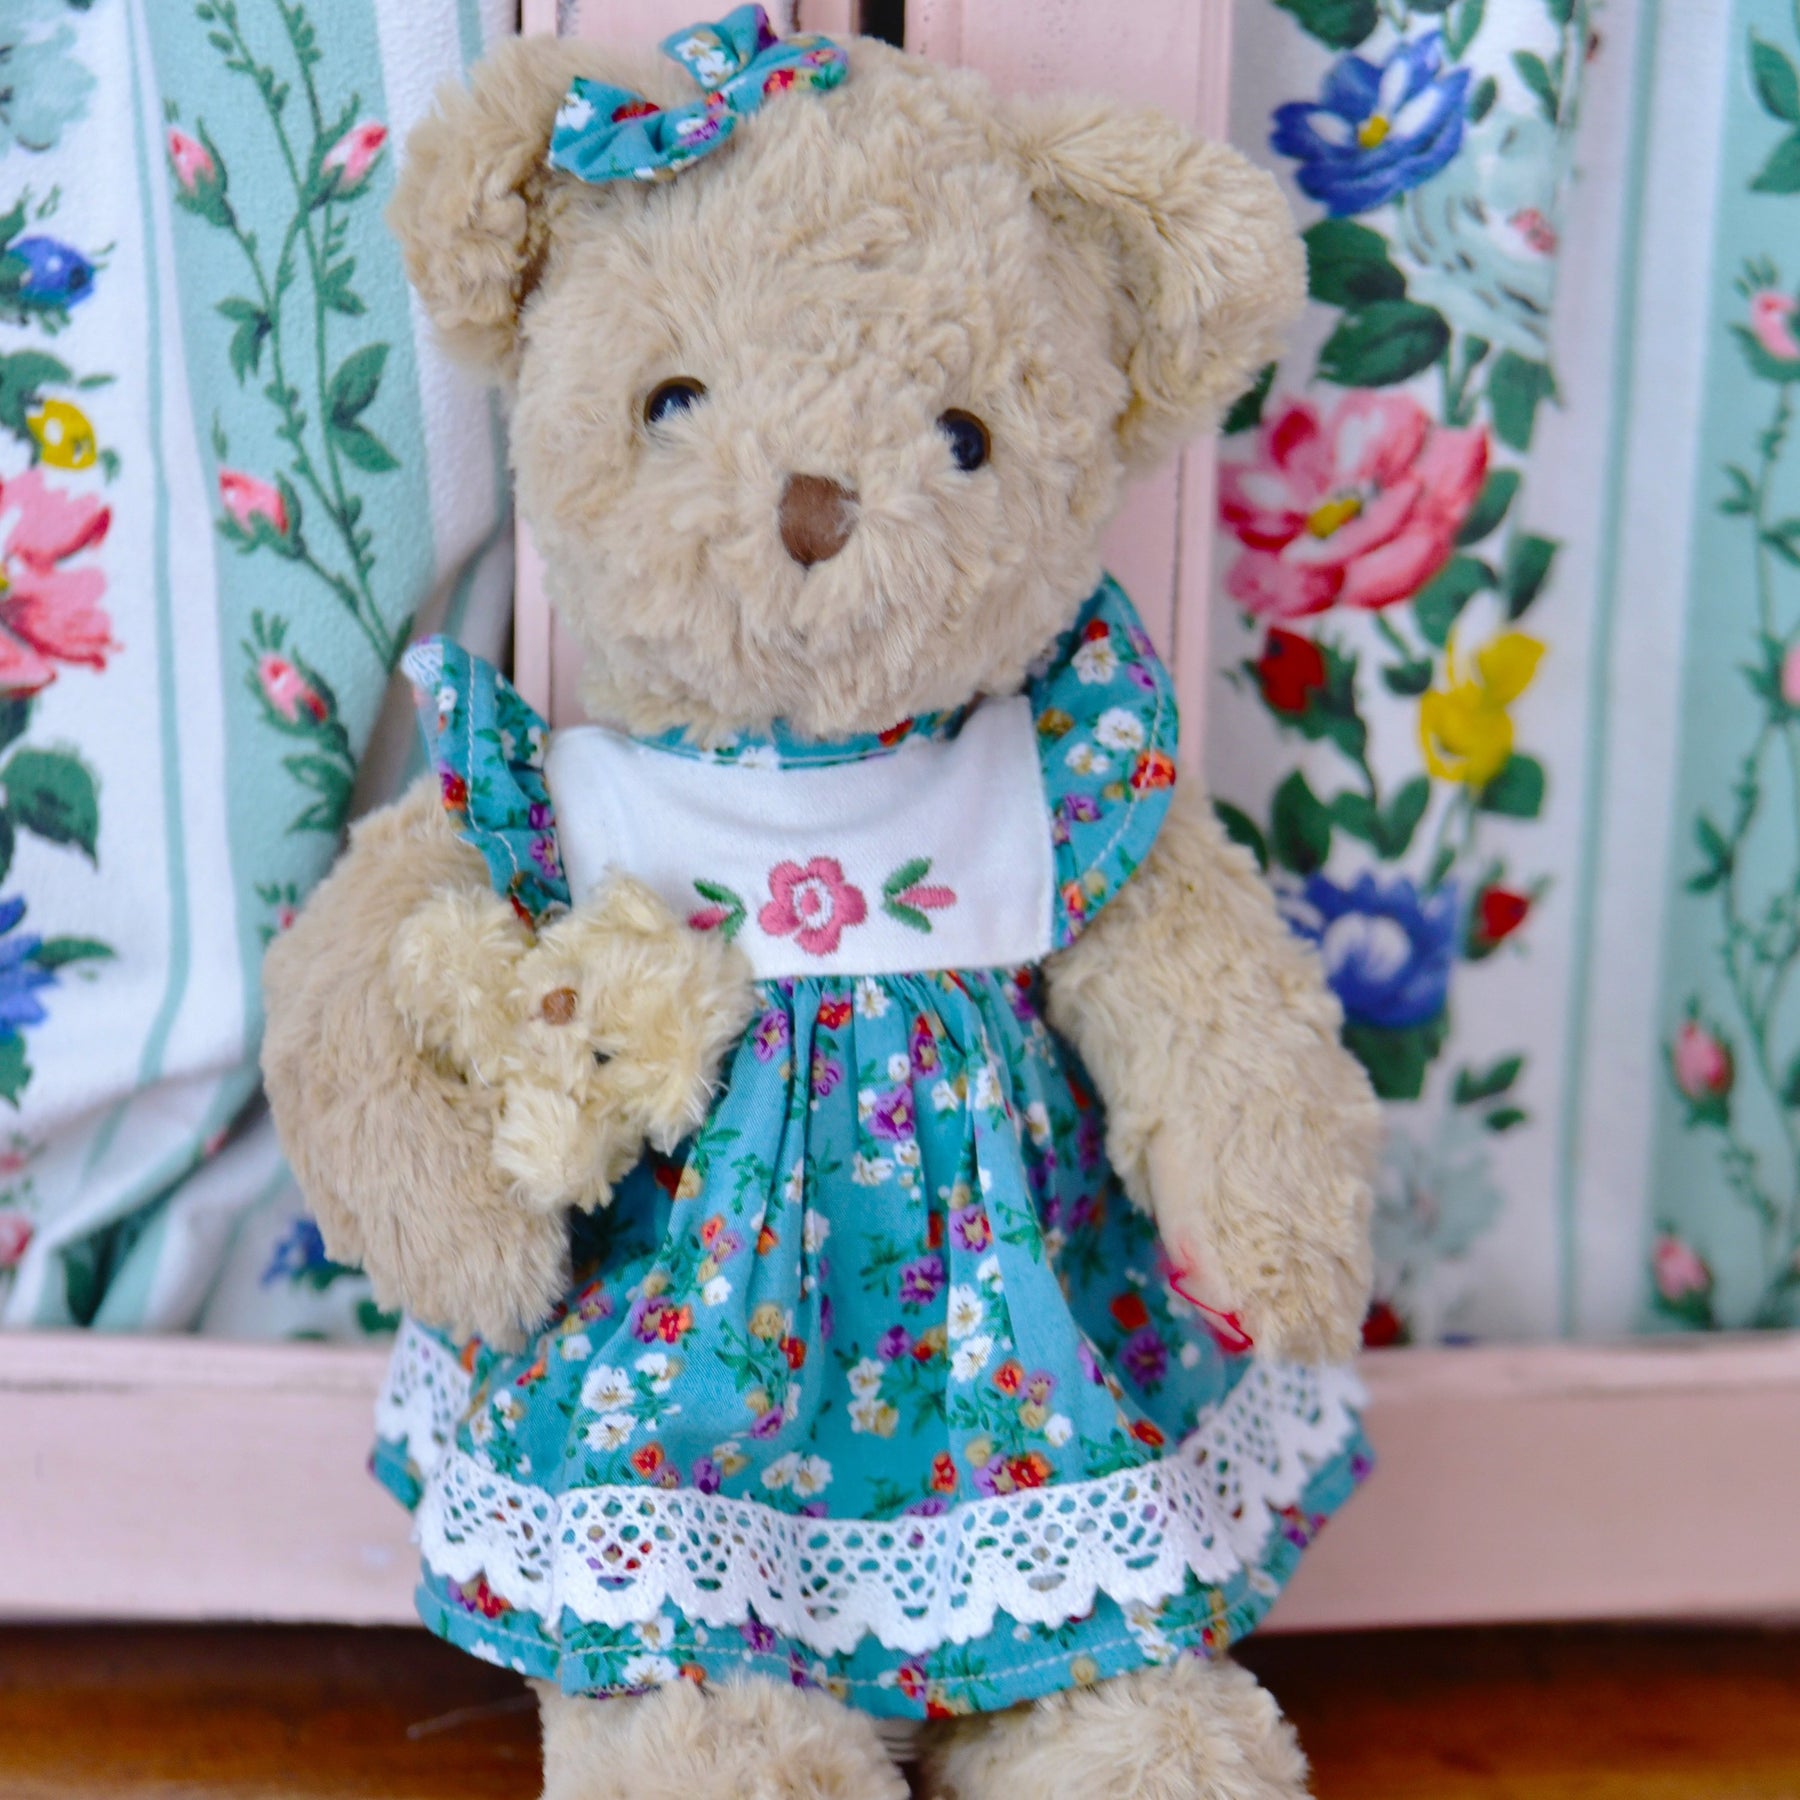 Teddy Bear in Green Floral Dress with Baby Bear